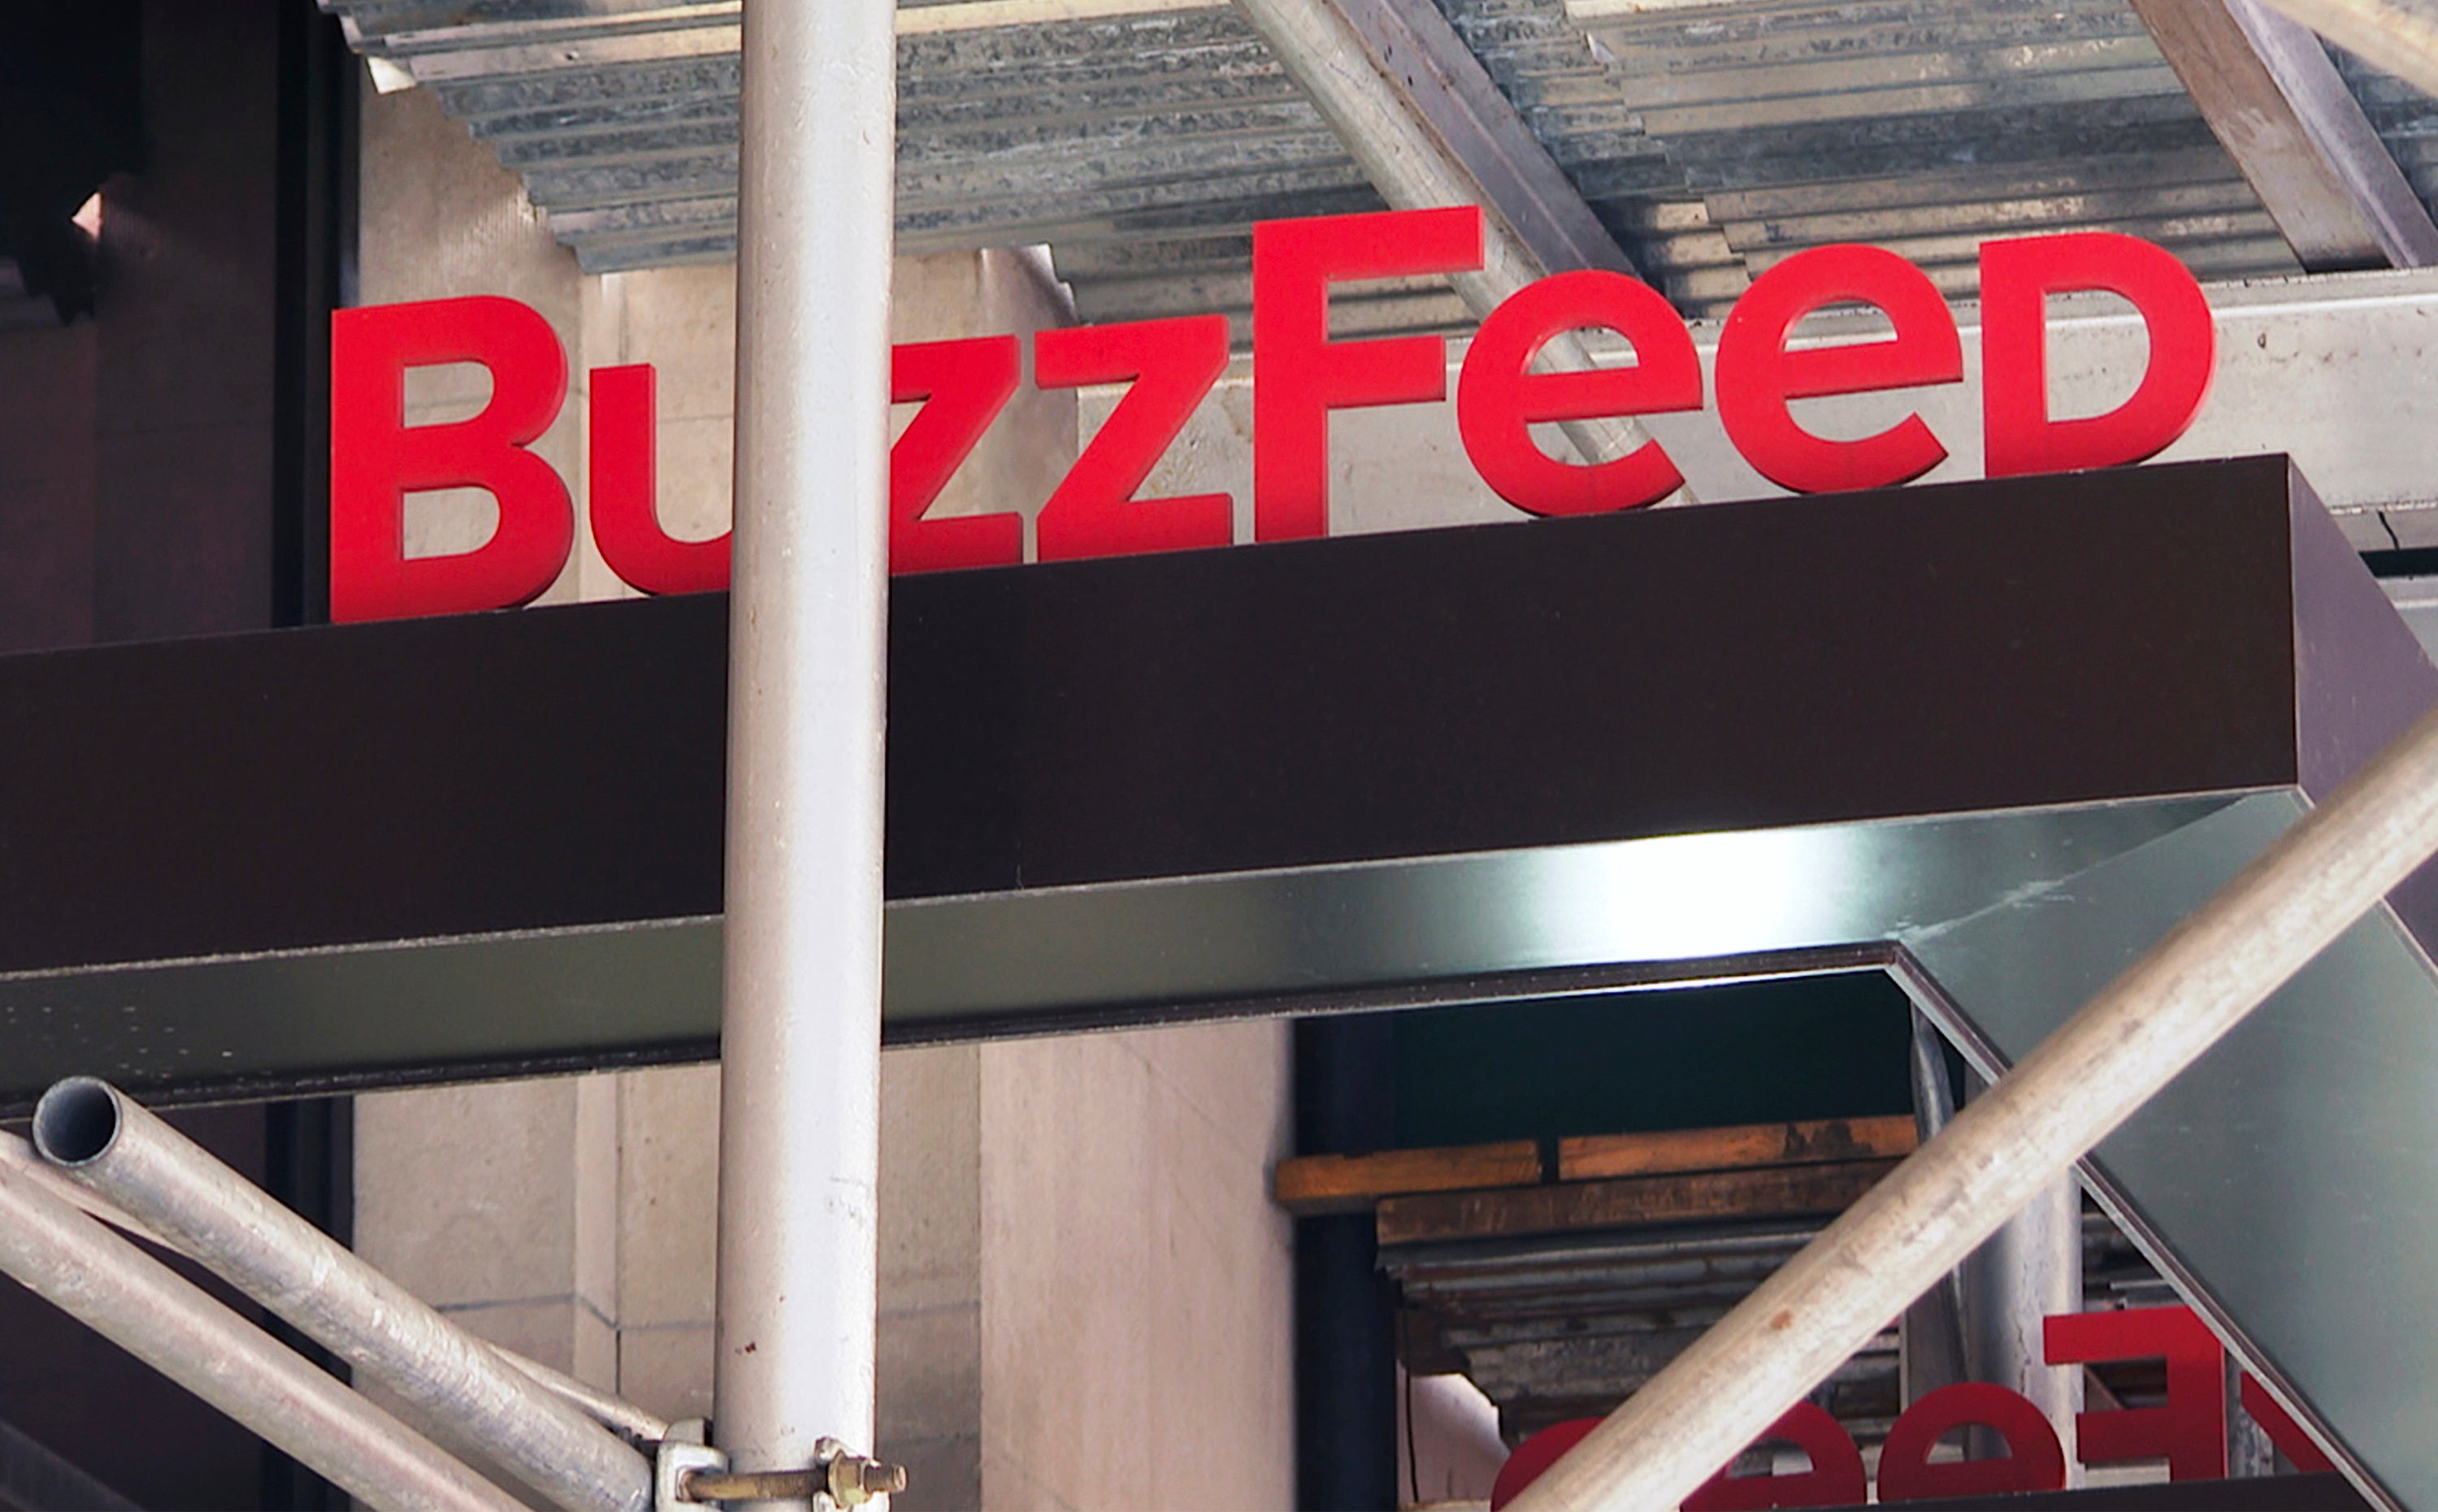 BuzzFeed and the other platforms including HuffPost will continue to operate as separate websites after the deal, the companies said